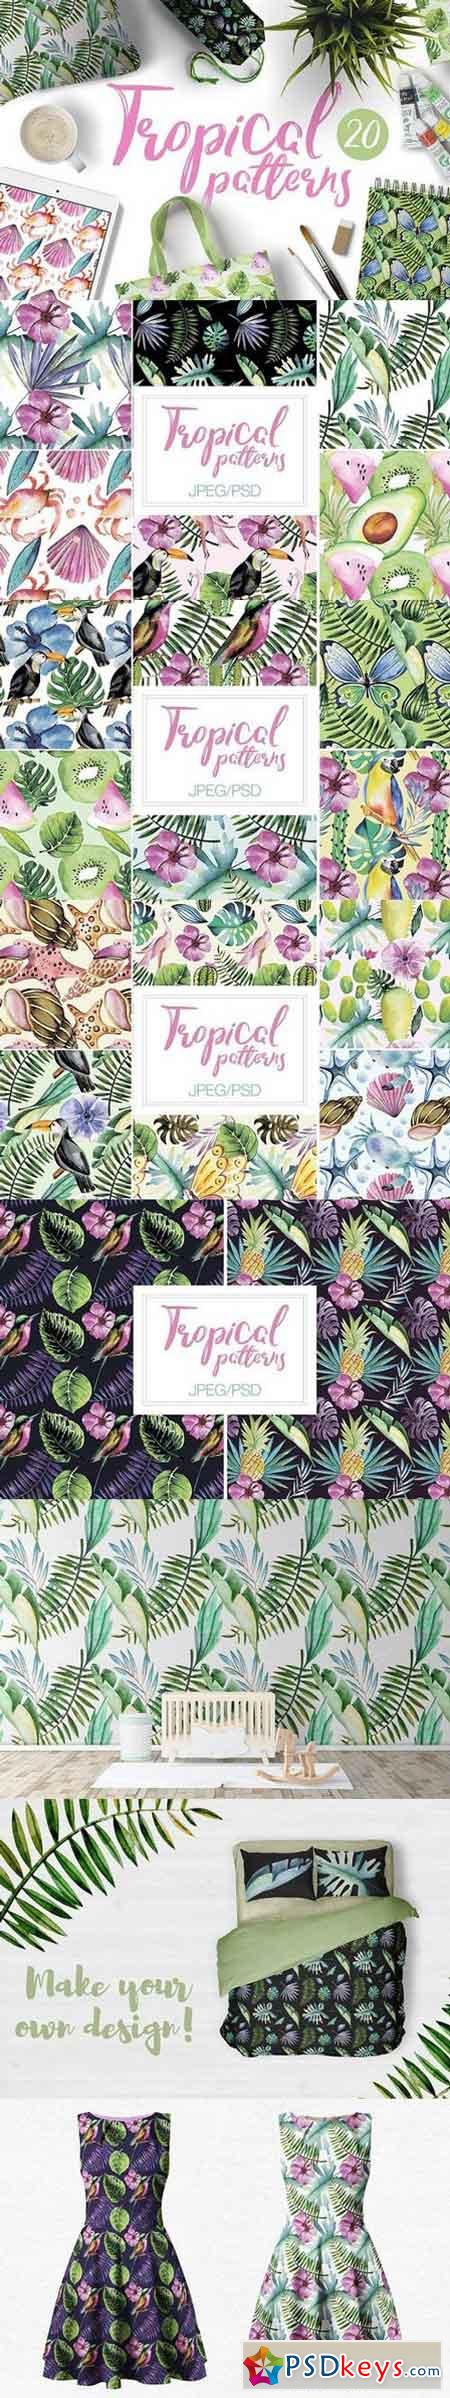 Watercolor Tropical Patterns 1808366